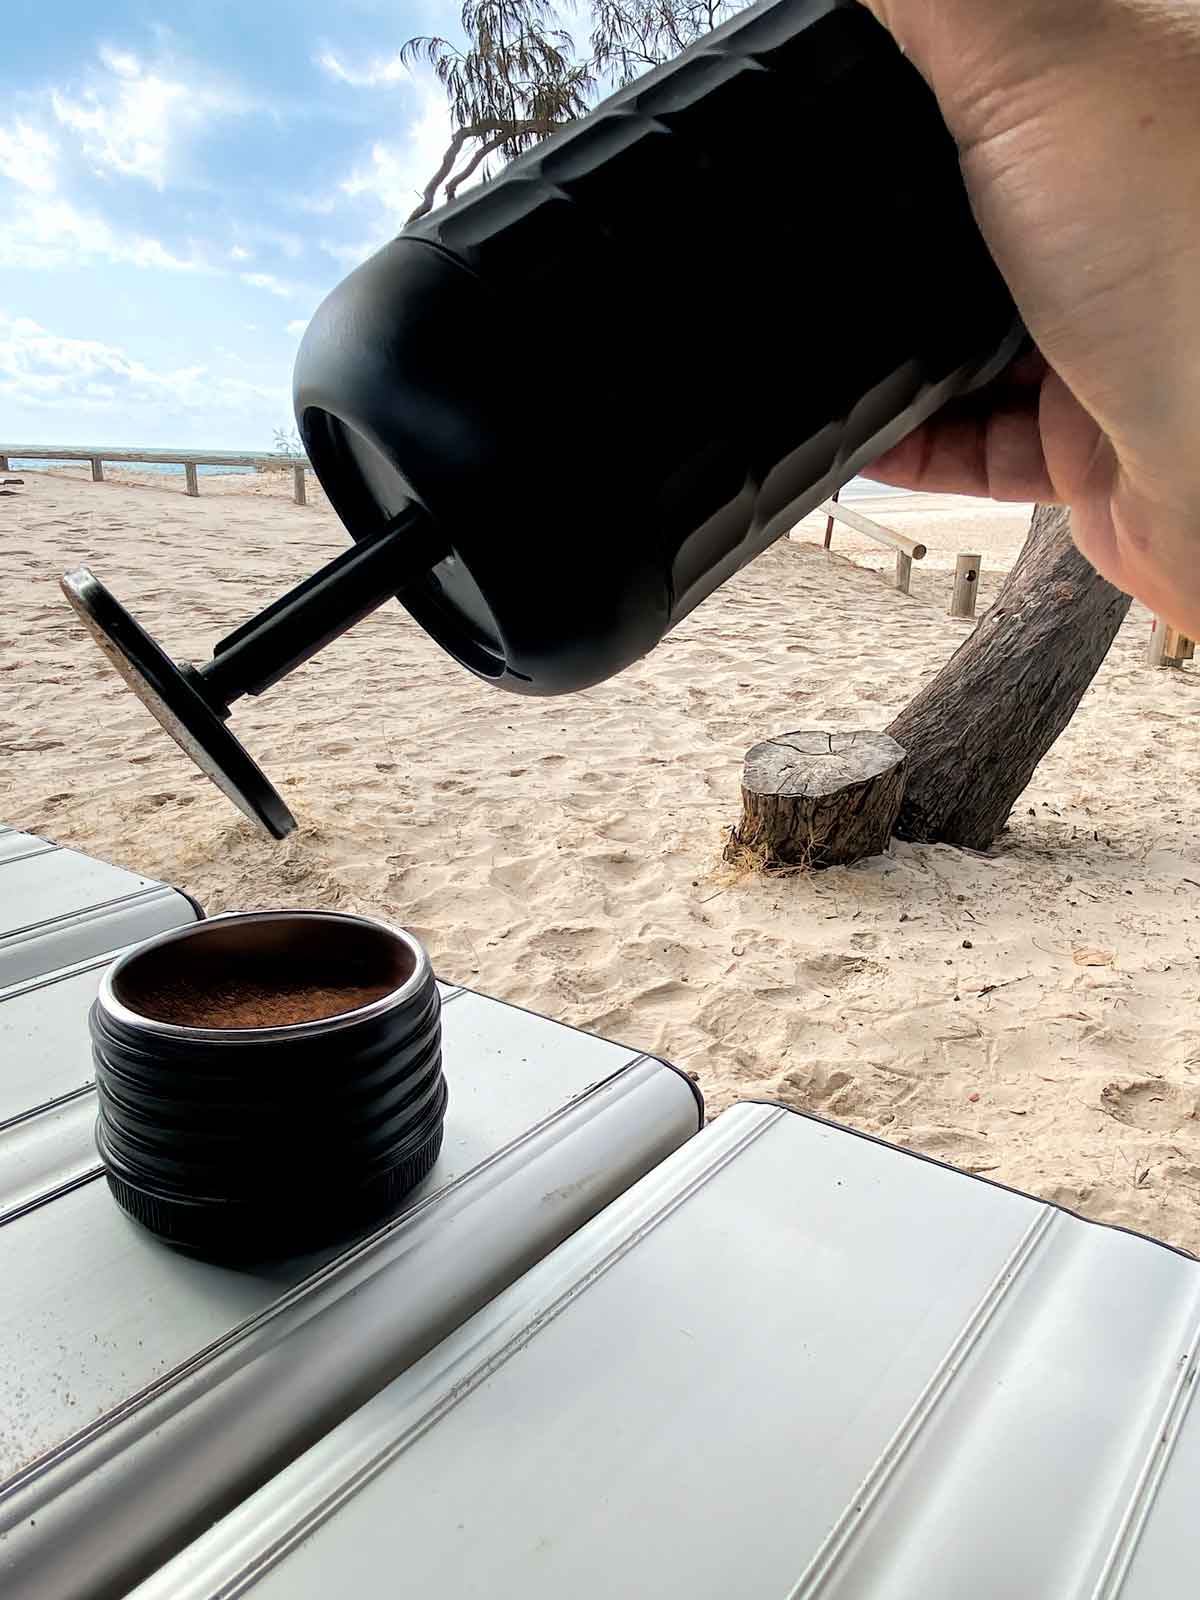 Using the pump top as a tamp for the espresso grounds